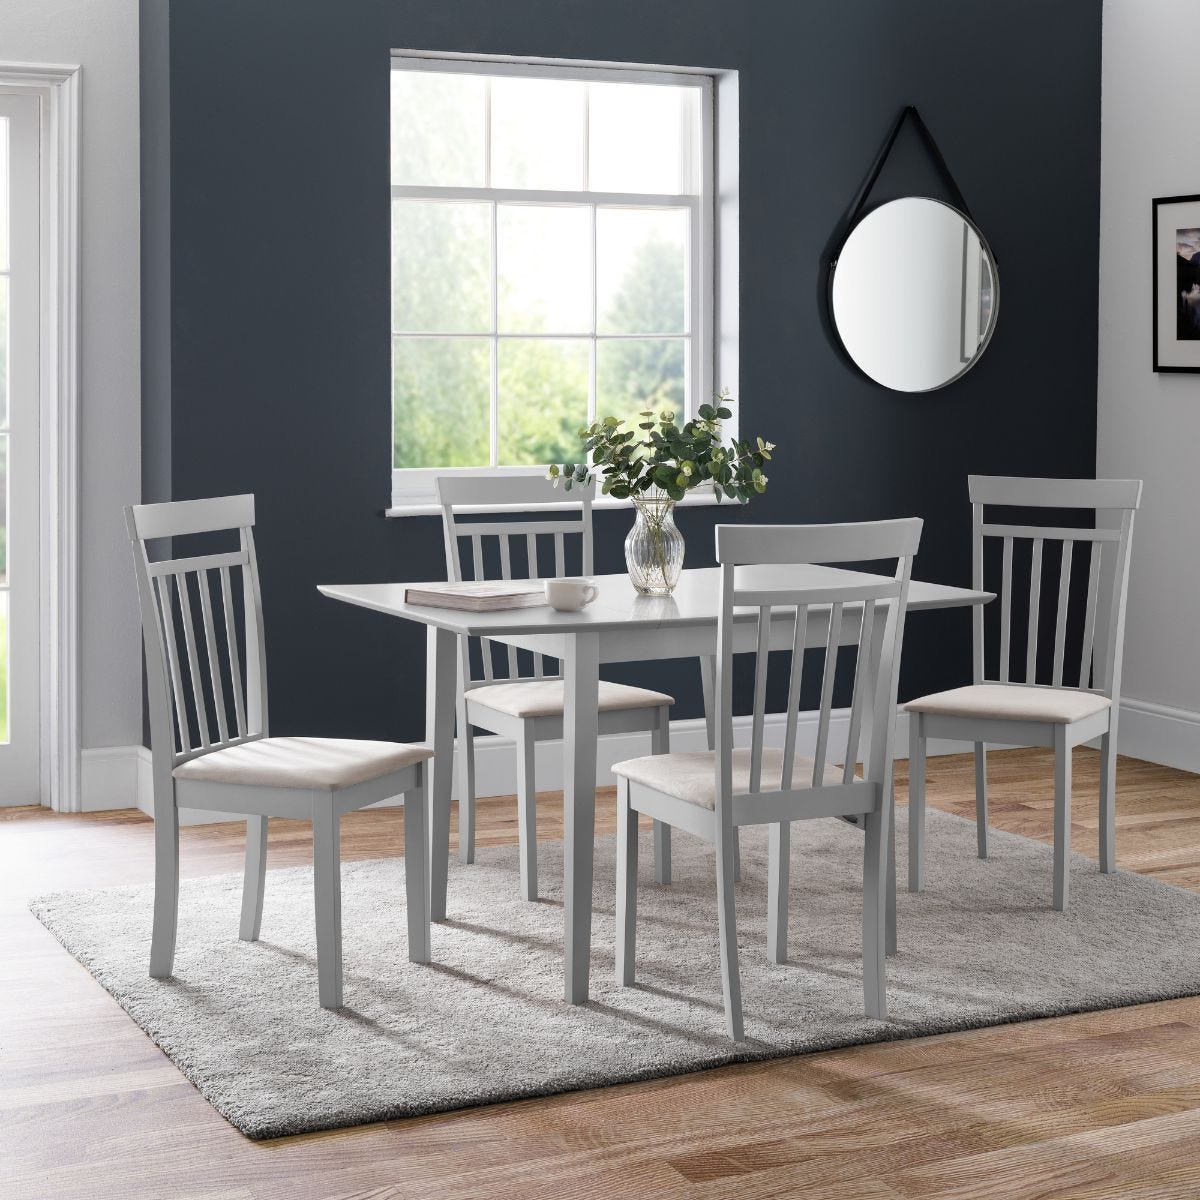 Julian Bowen Set Of Rufford Grey Extending Dining Table And 4 Coast Grey Chairs